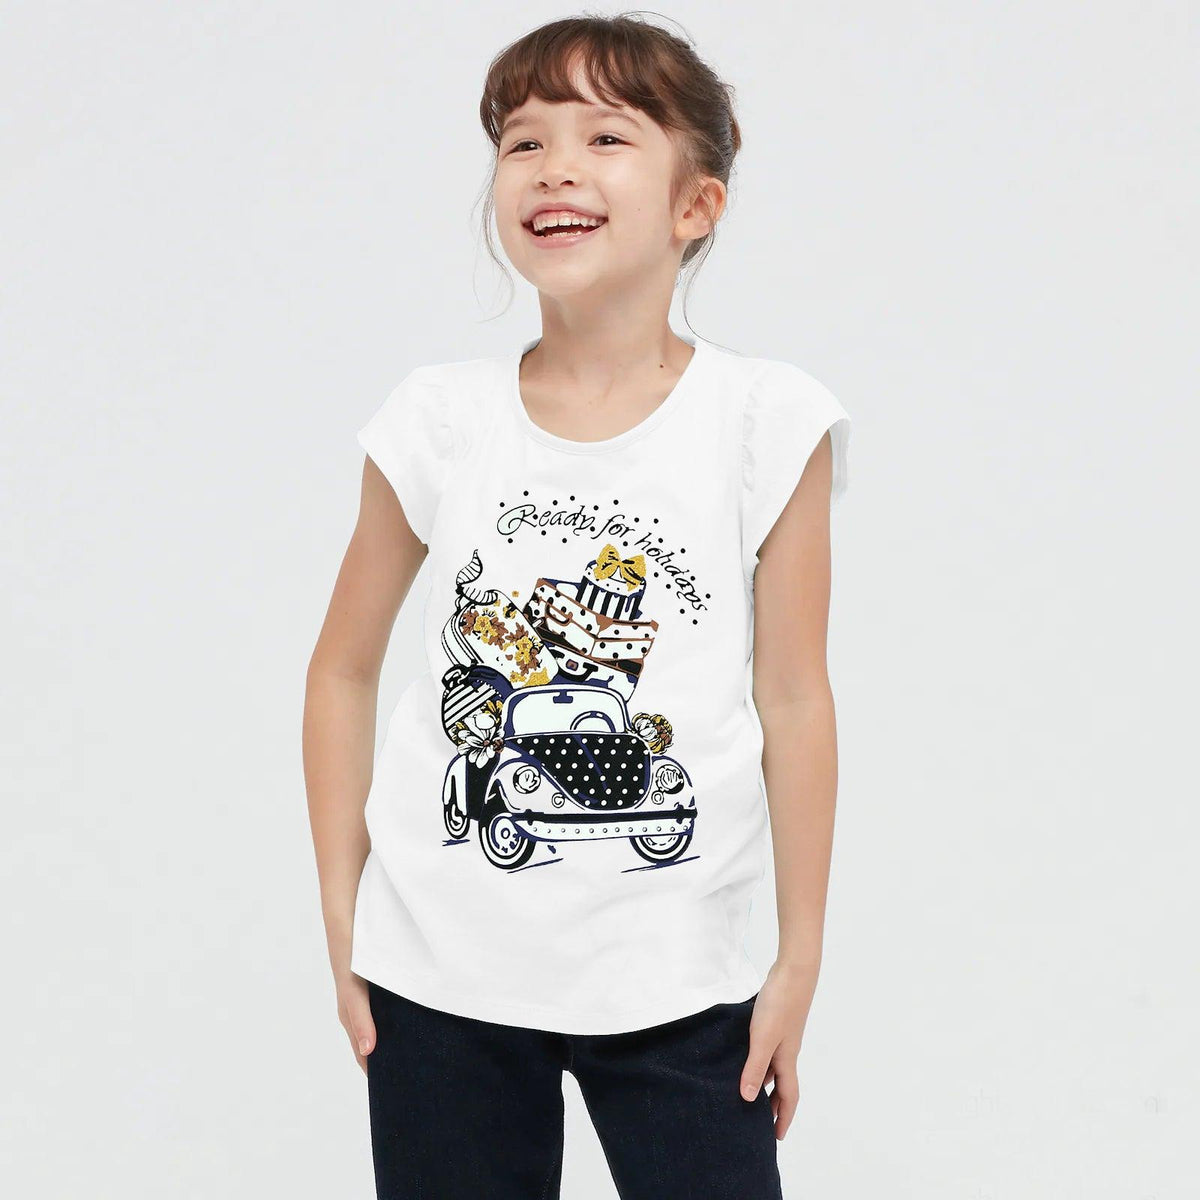 White Graphic Printed Soft Cotton T-Shirt For Girls 9 MONTH - 10 YRS (MI-10958) - Brands River